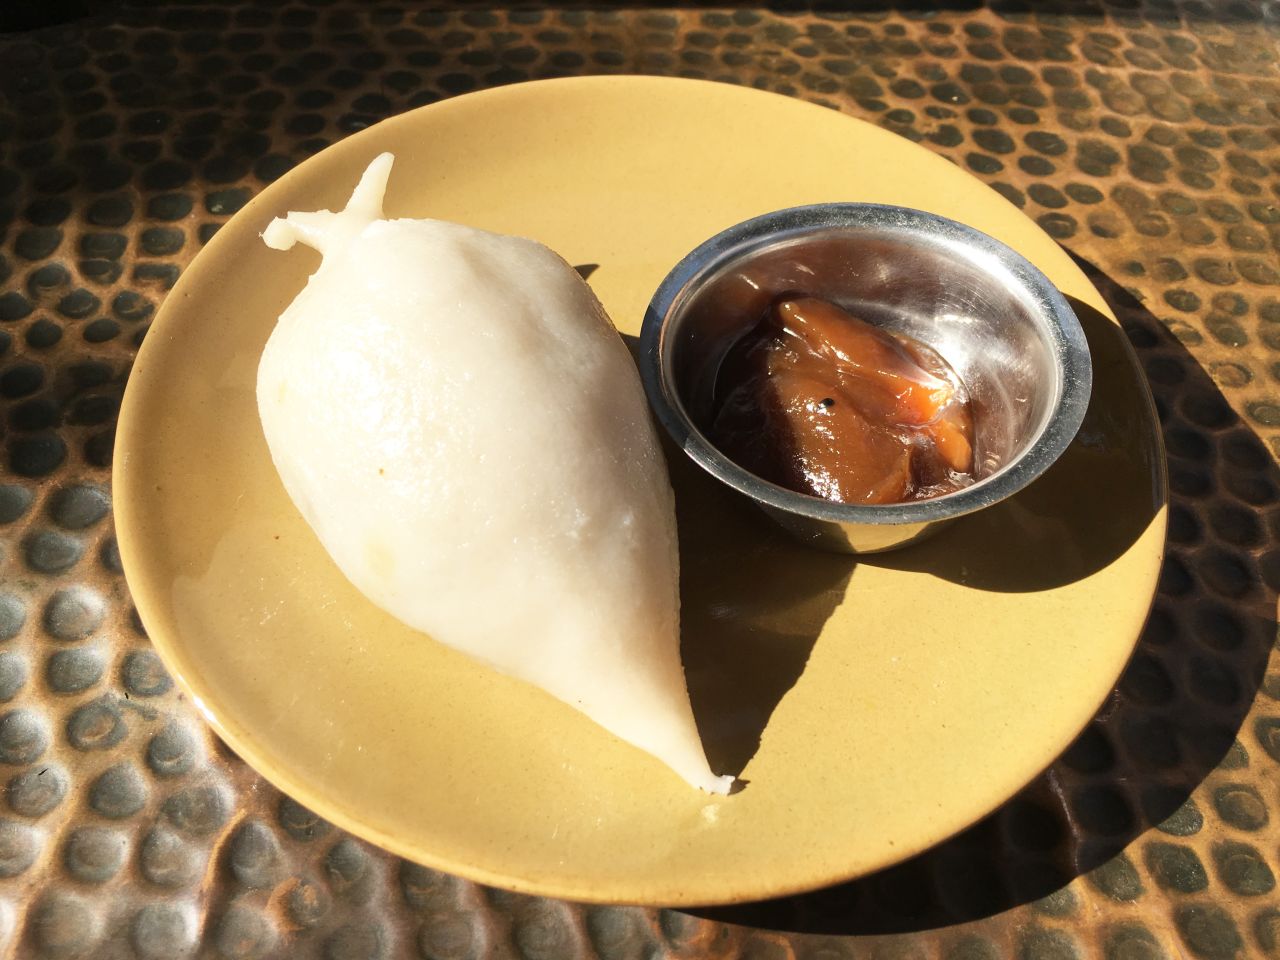 This steamed rice bun is a dessert, containing runny sweet fillings.